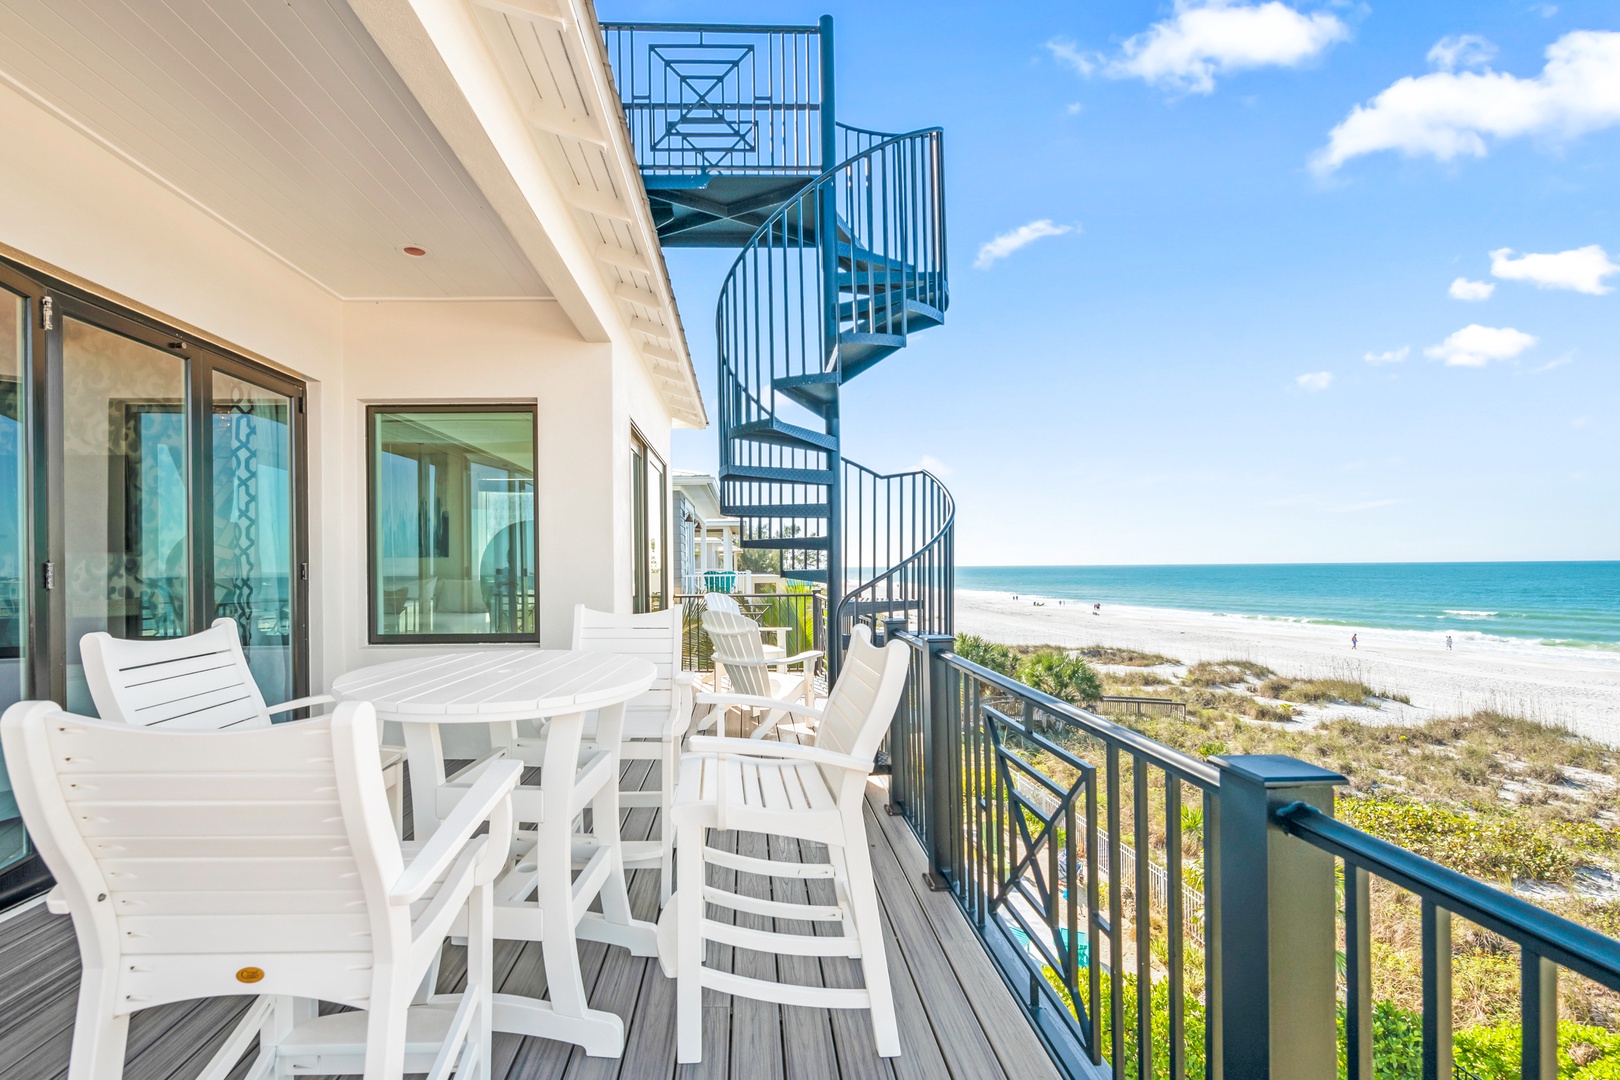 Balcony with Views of the Beach